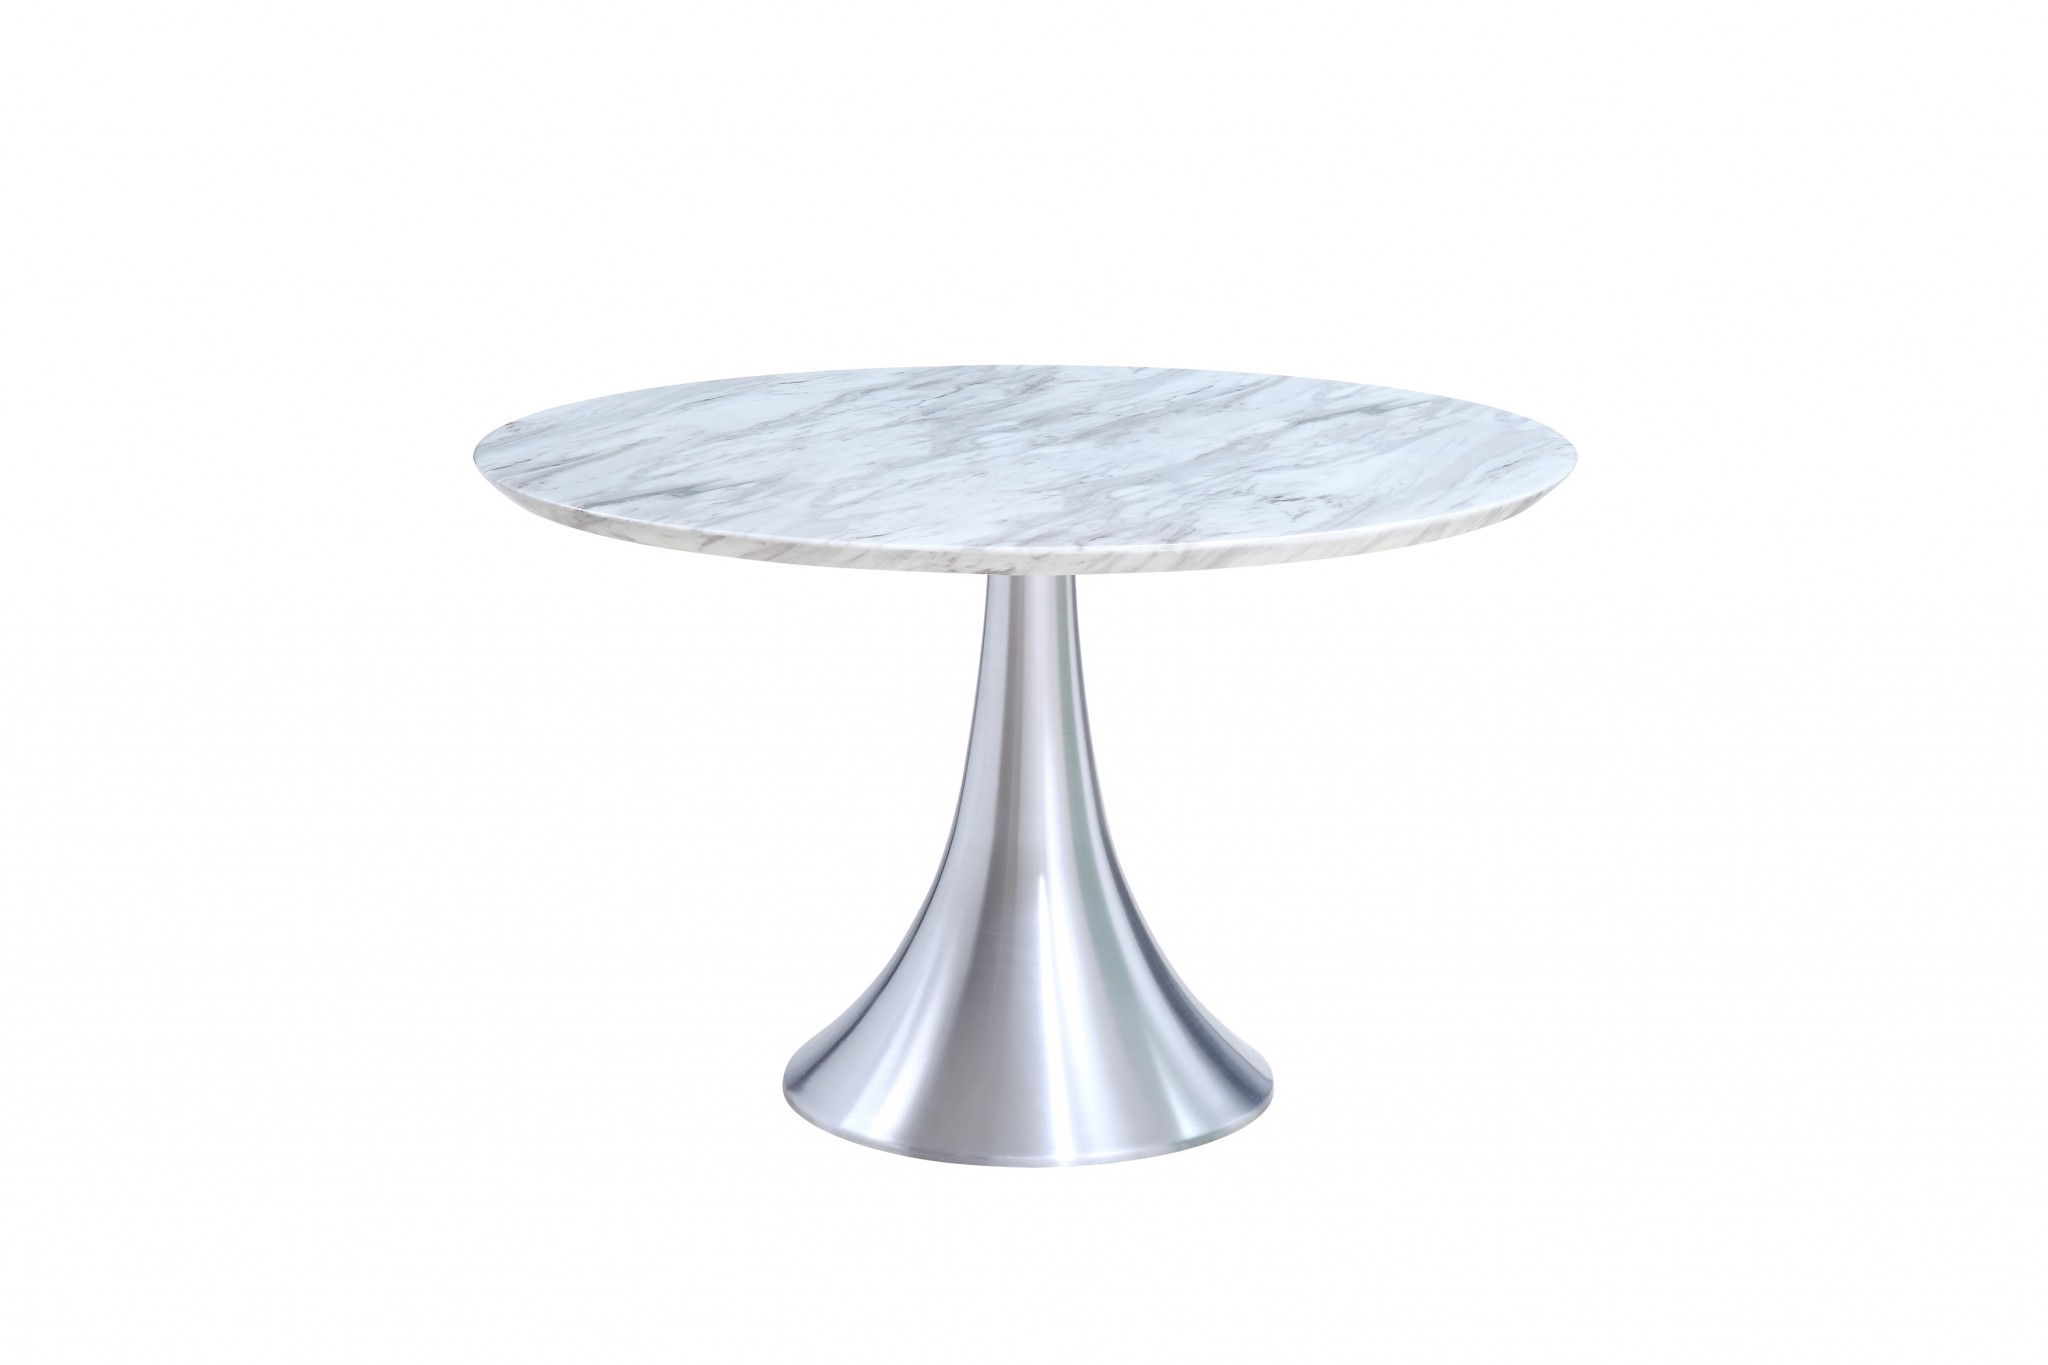 43" X 43" X 30" White Marble Stainless Steel Round Dining Table